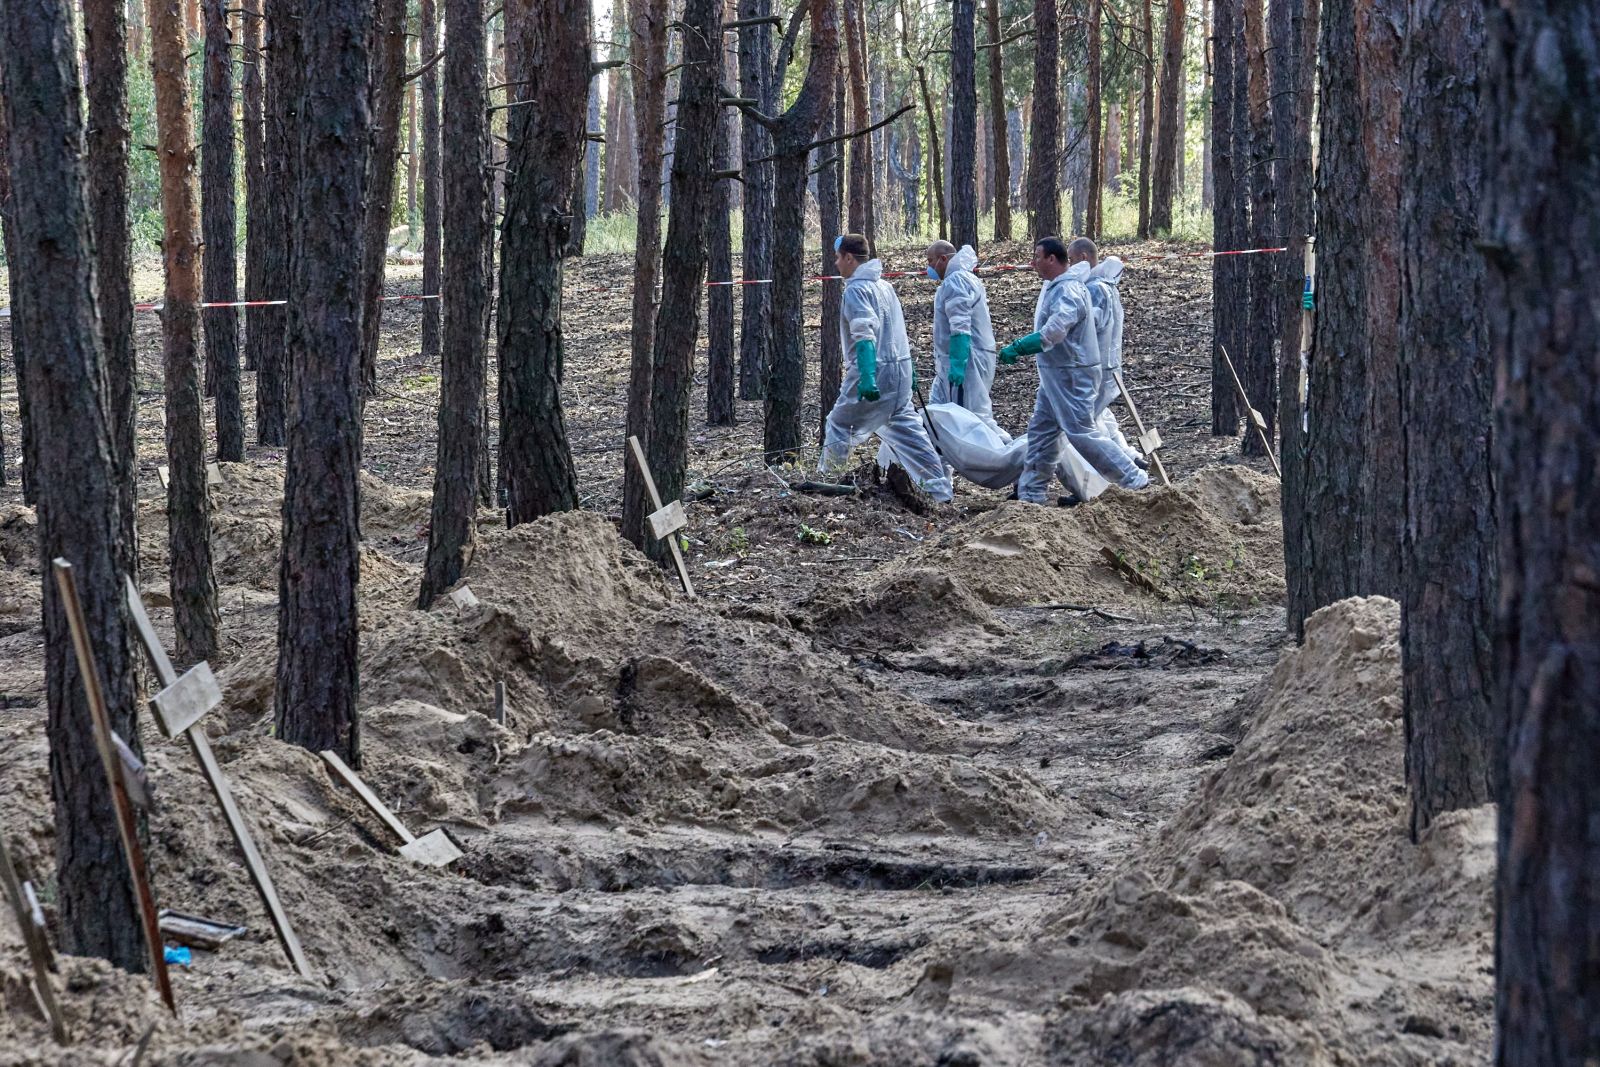 epa10194312 Ukrainian workers carry a body that was unearthed from graves in Izyum, Kharkiv region, northeastern Ukraine, 19 September 2022. A mass burial site was found after Ukrainian troops recaptured the town of Izyum. According to the head of the investigative department of the police of the Kharkiv region, the burial site, one of the largest in a recaptured city so far, counts more than 440 separate graves. The Ukrainian army pushed Russian troops from occupied territory in the northeast of the country in a counterattack. Kharkiv and surrounding areas have been the target of heavy shelling since February 2022, when Russian troops entered Ukraine starting a conflict that has provoked destruction and a humanitarian crisis.  EPA/SERGEY KOZLOV